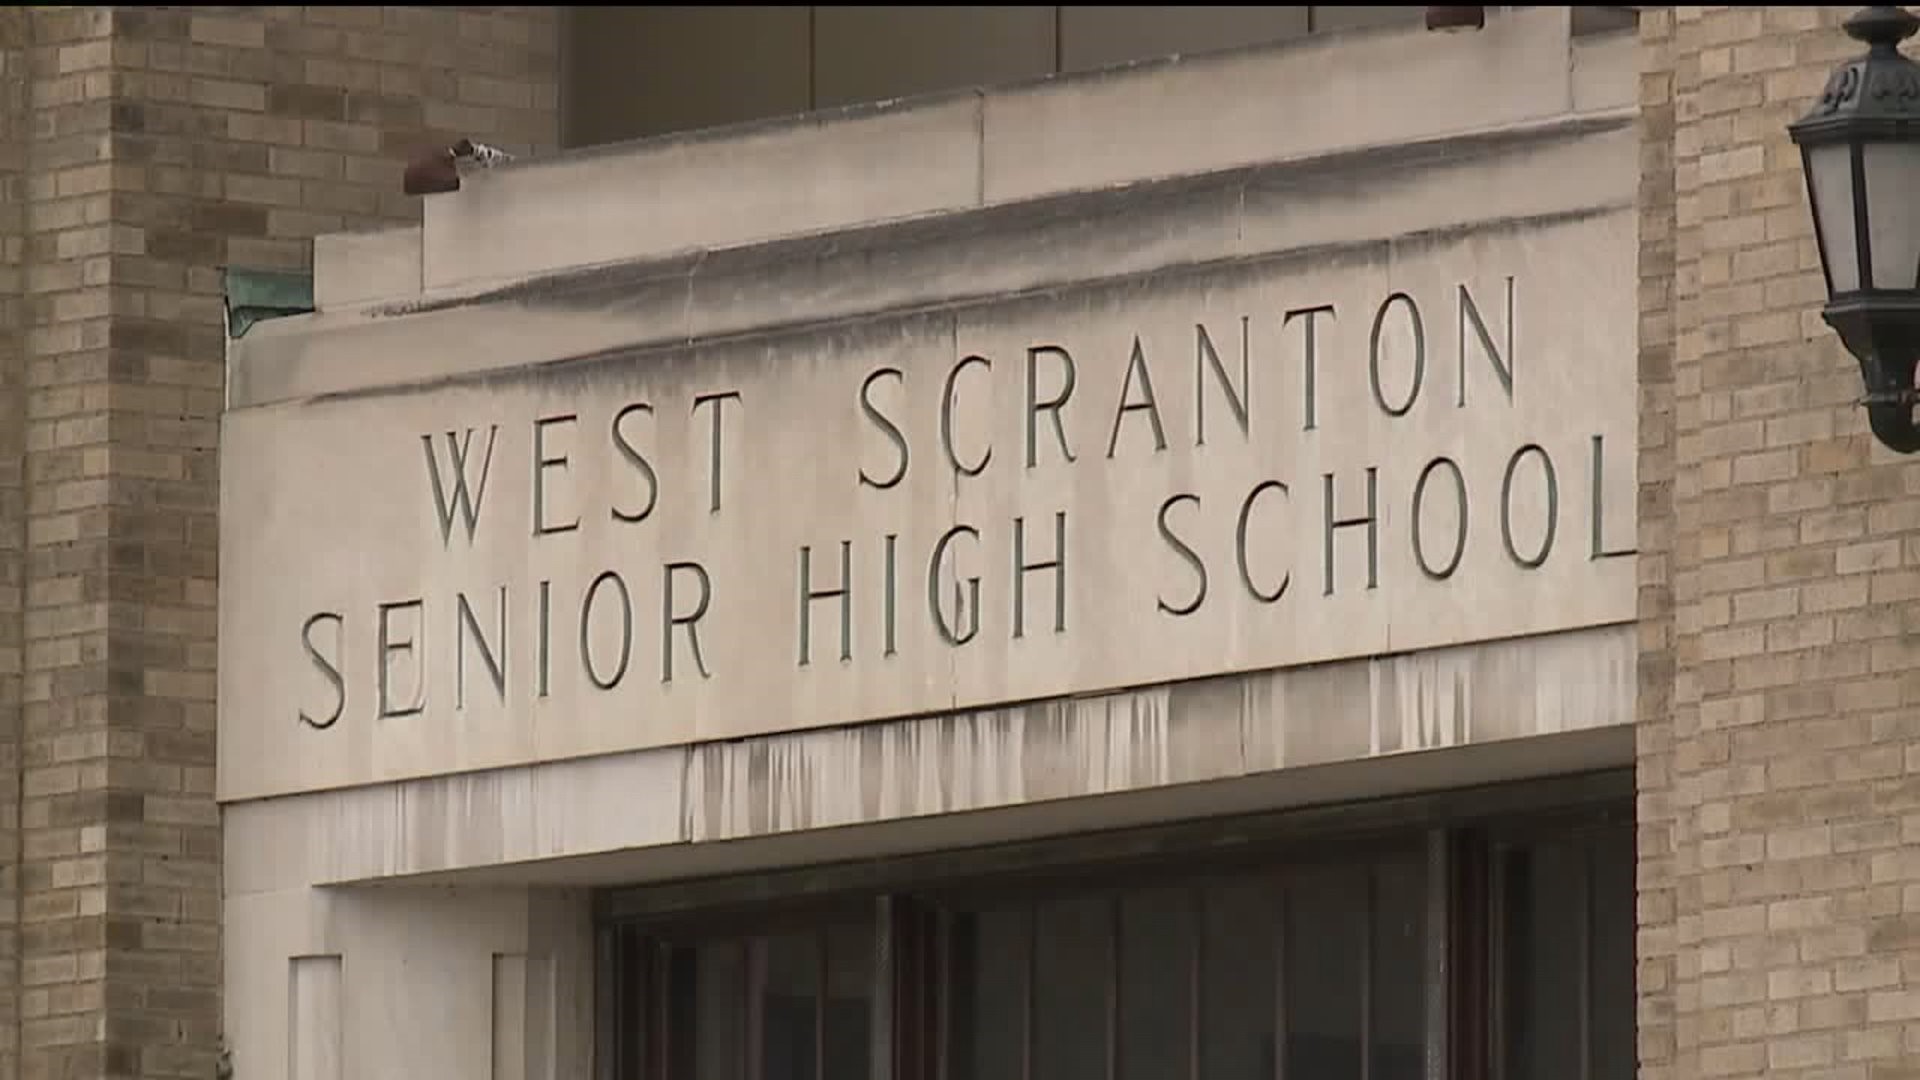 Four Students Face Charges for Scranton School Threats